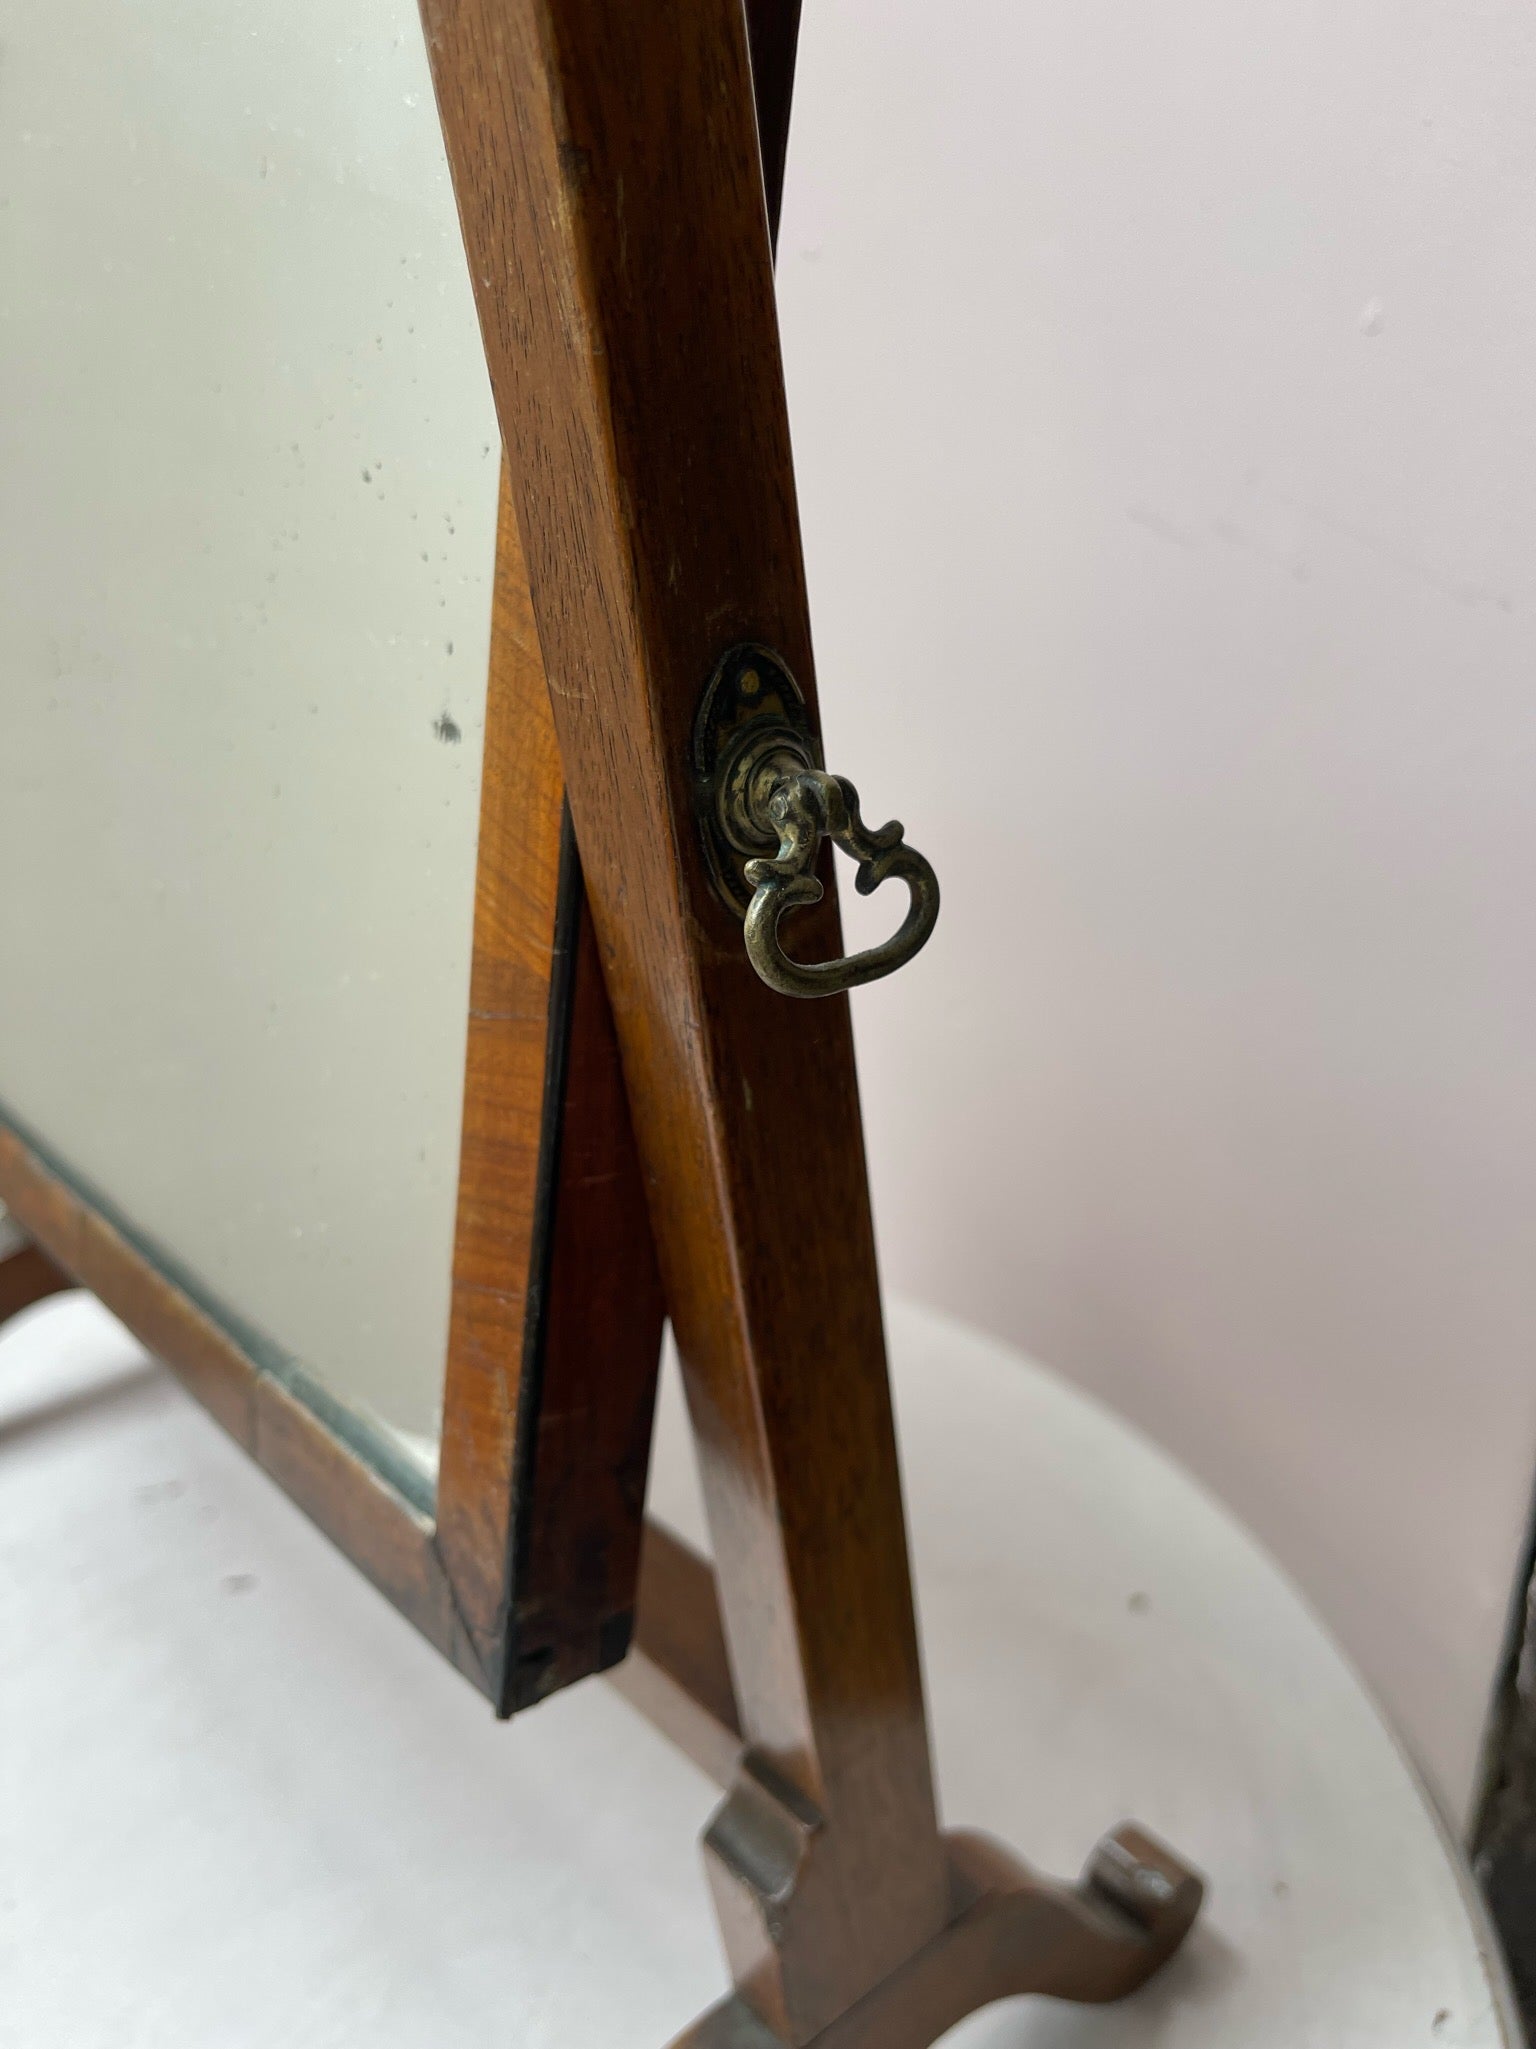 Antique French Table Mirror